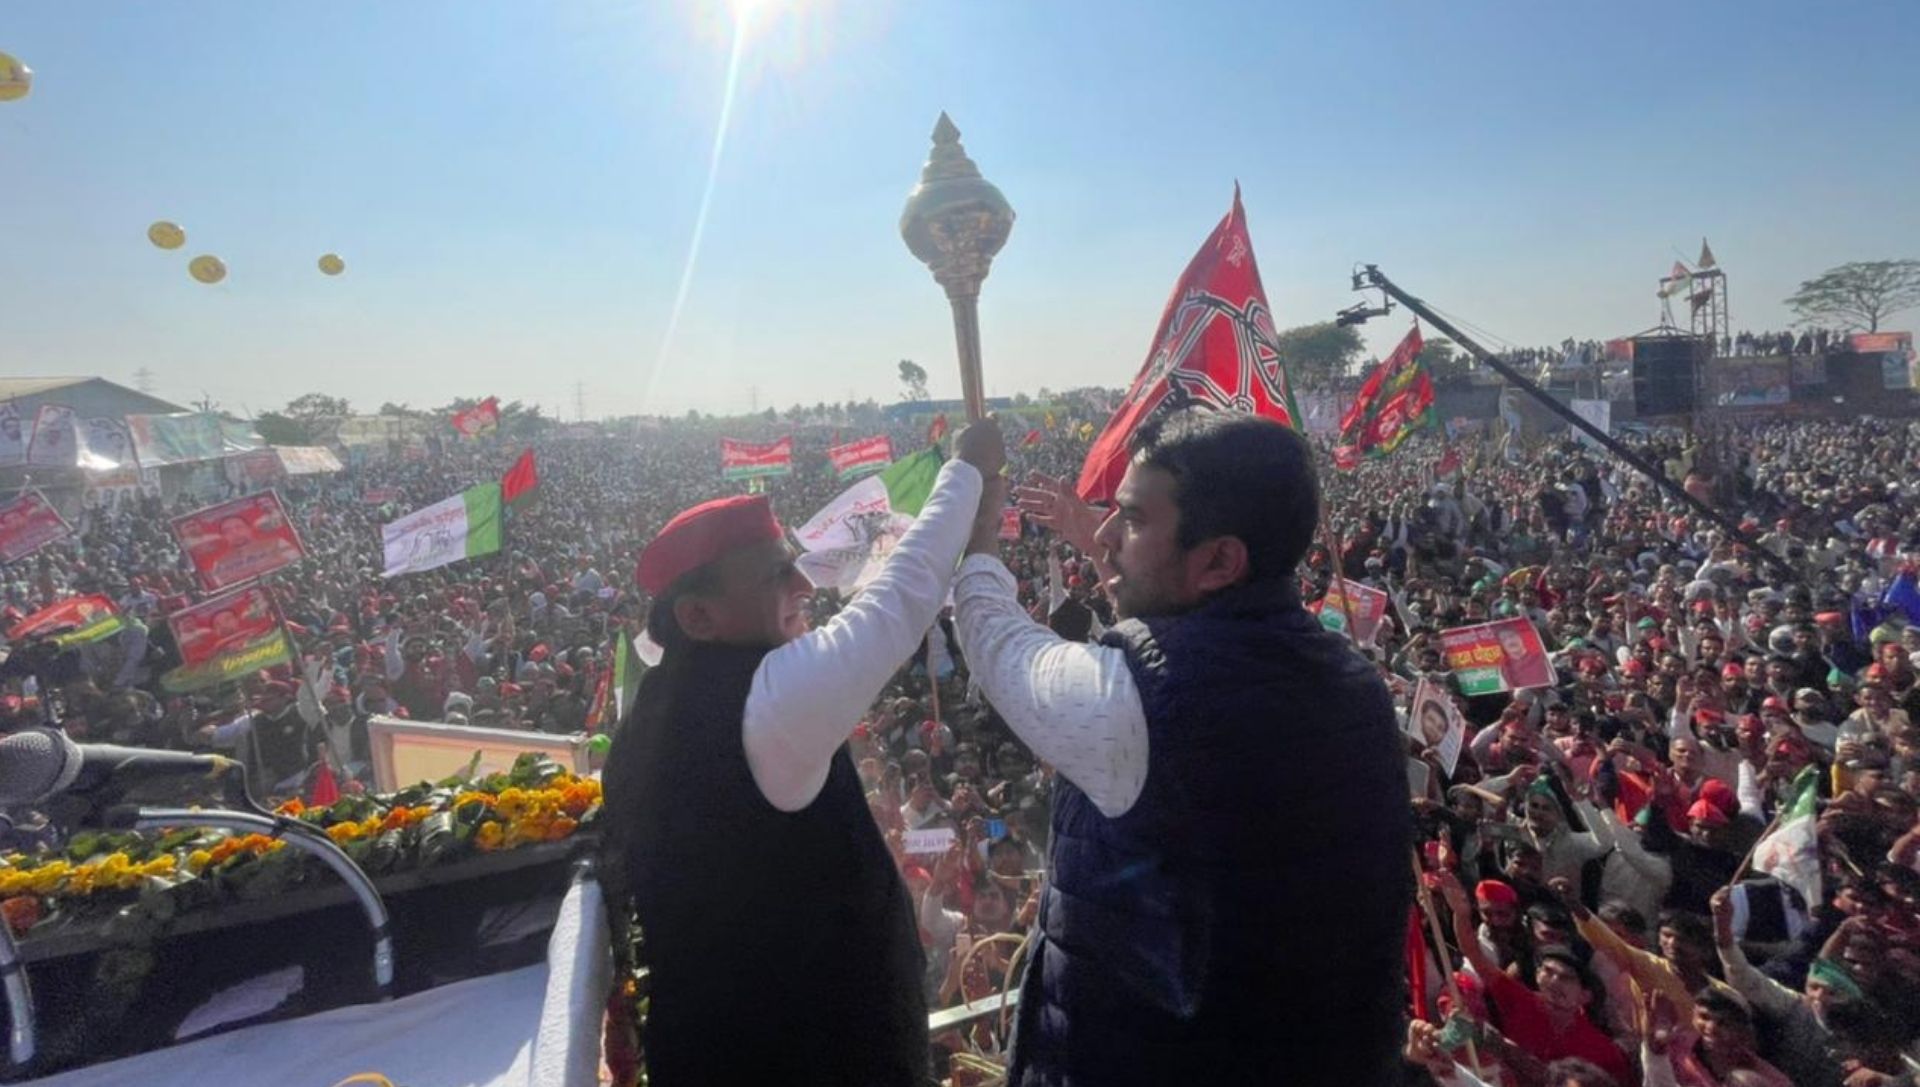 War Cry Against BJP Government in a joint rally in UP